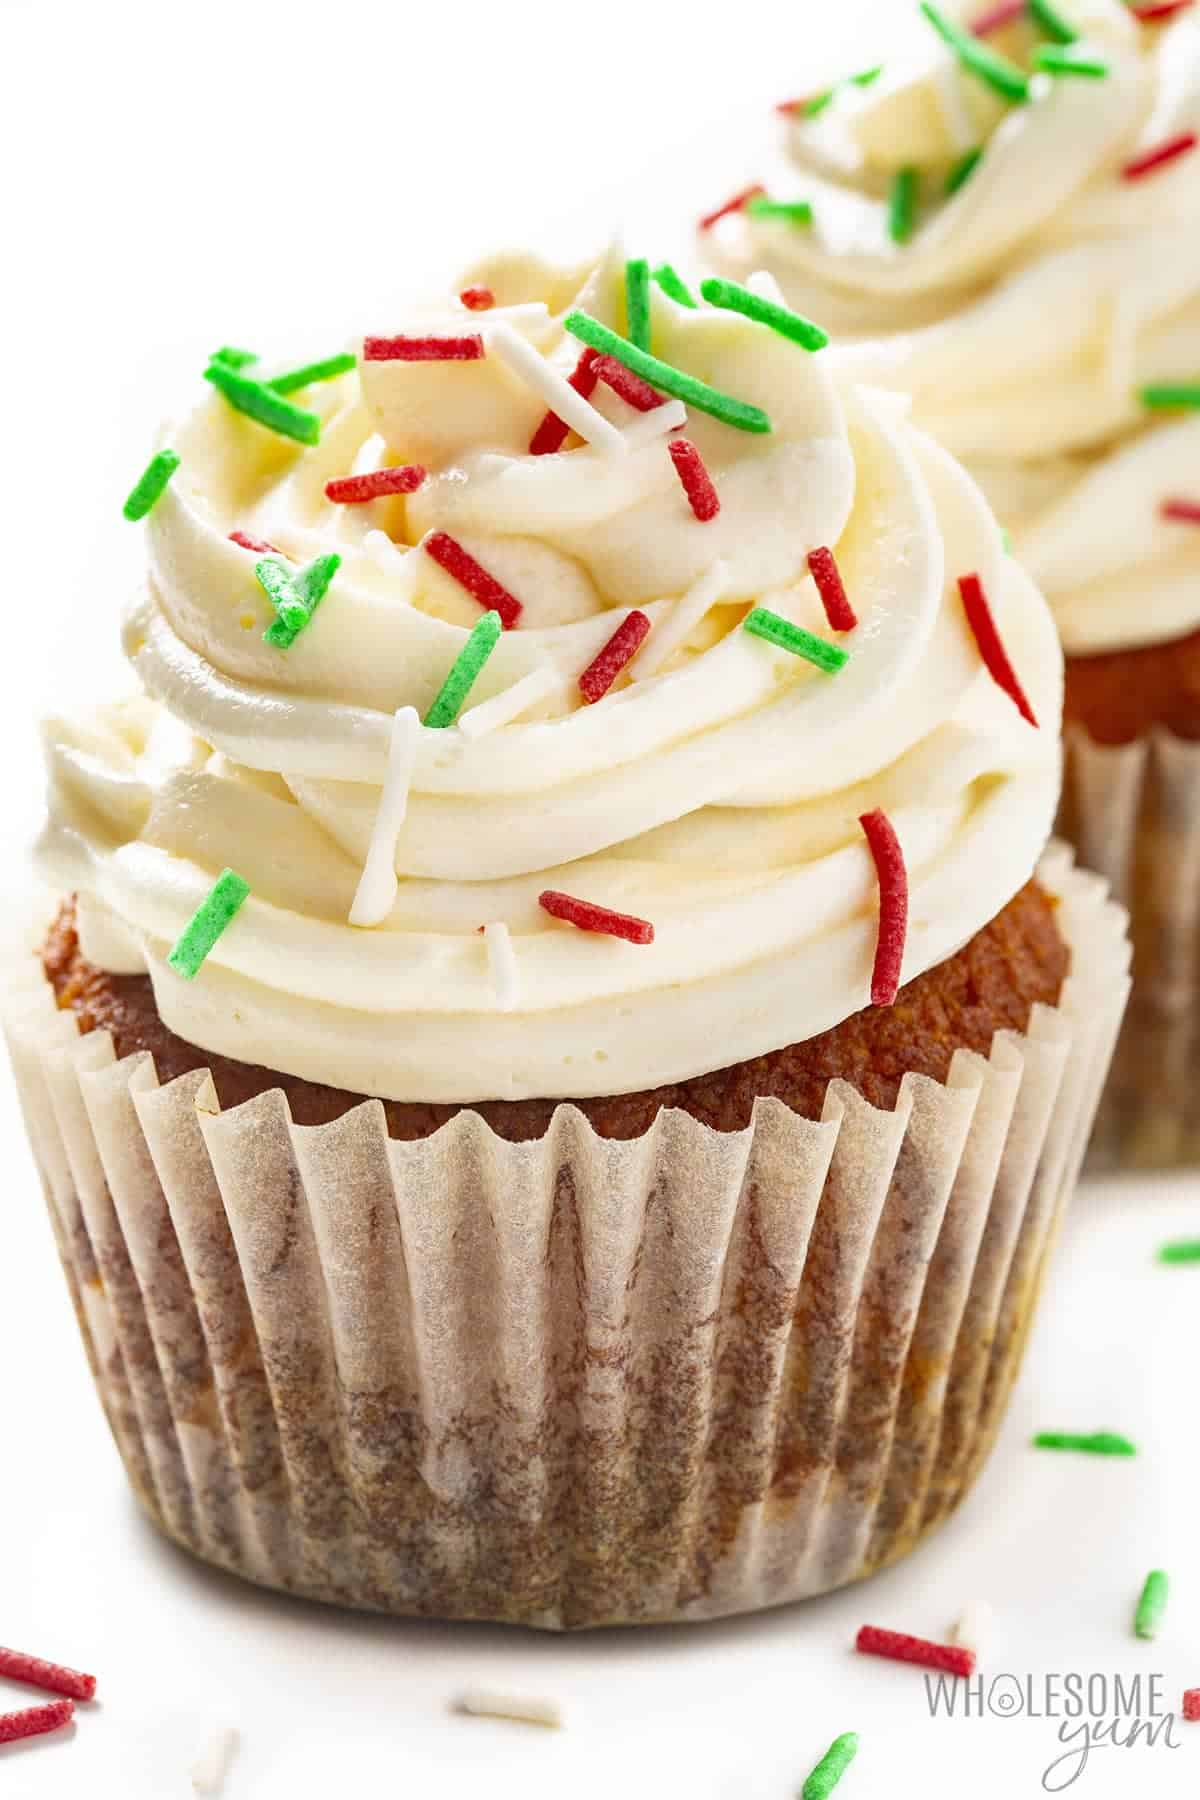 Sugar free buttercream on top of a cupcake with sprinkles